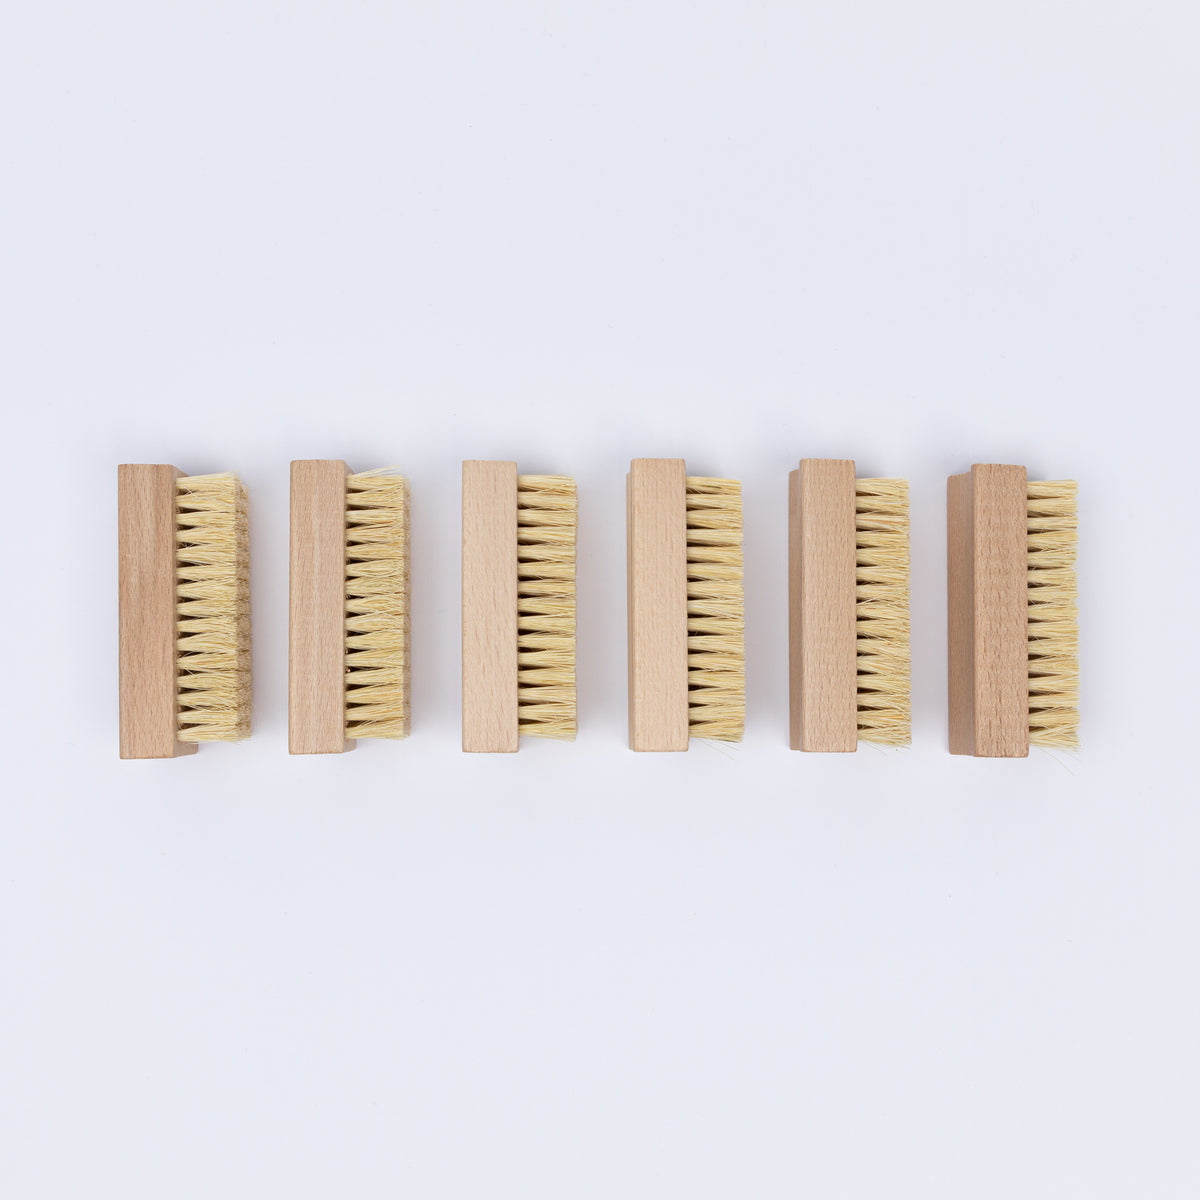 LAUNDRY - CLEANER Brushes (6 Pack)